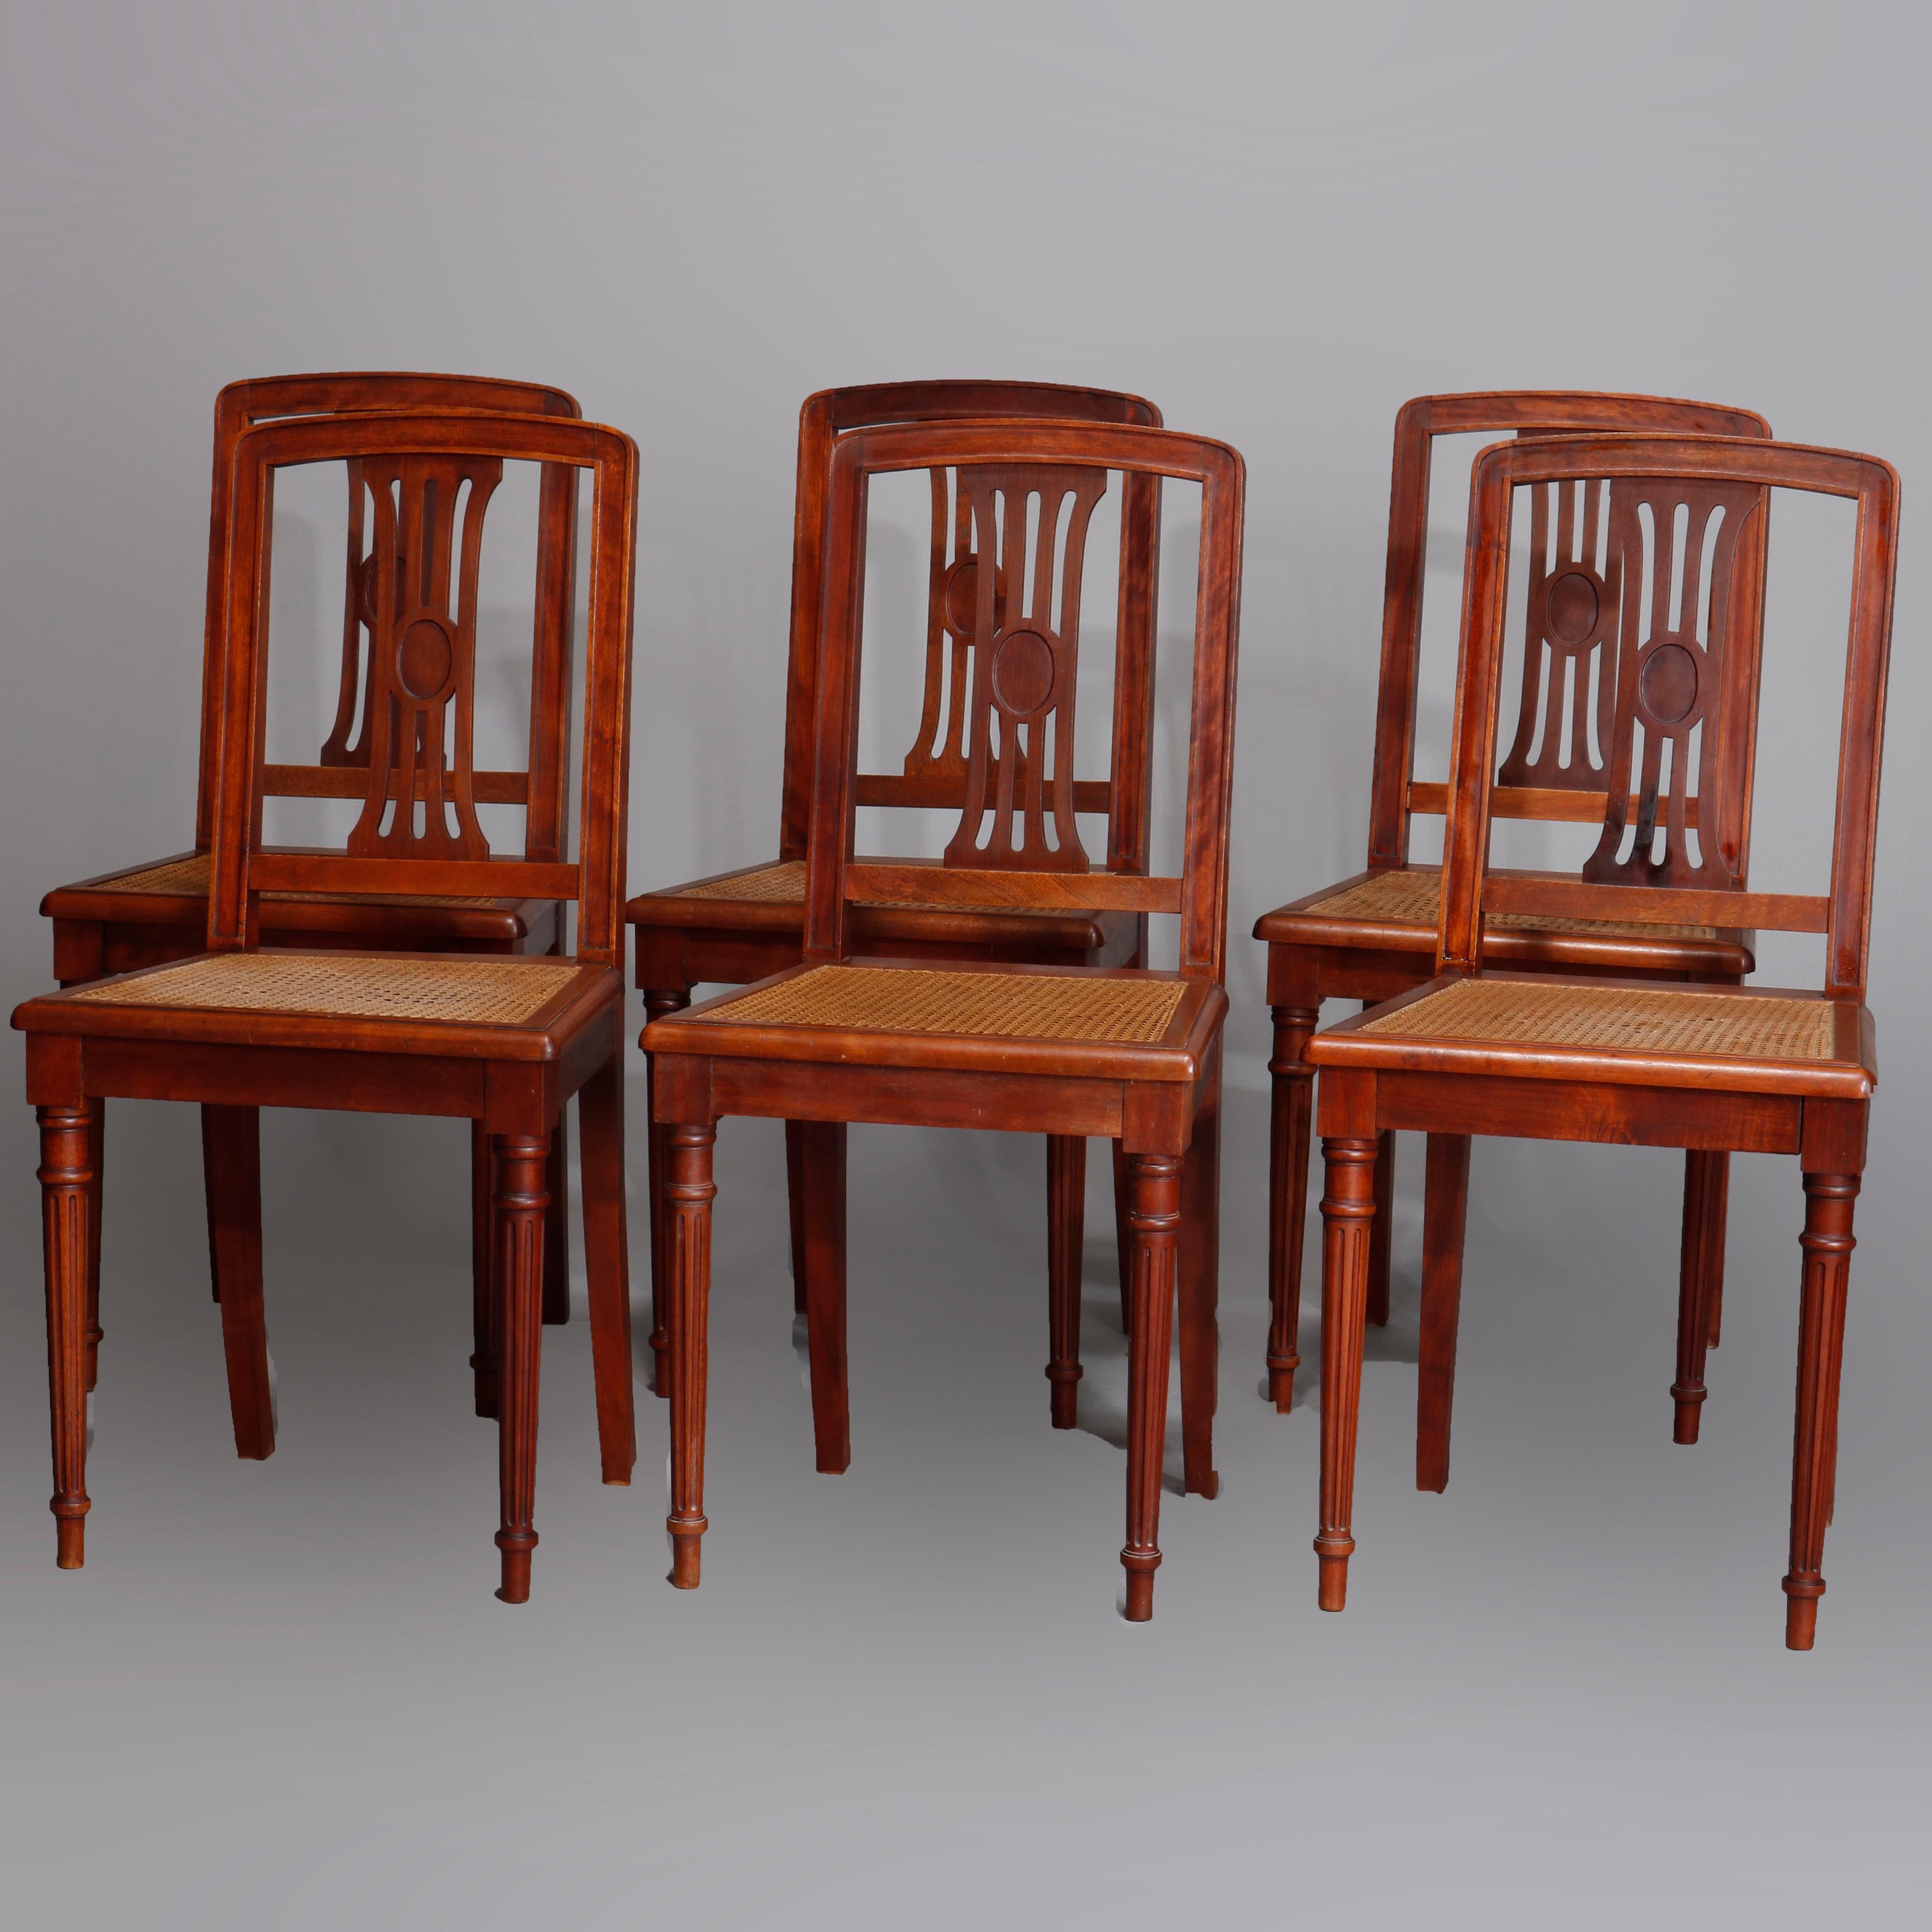 Six Antique French Louis XVI Mahogany Cane Seat Chairs, Early 20th Century For Sale 5